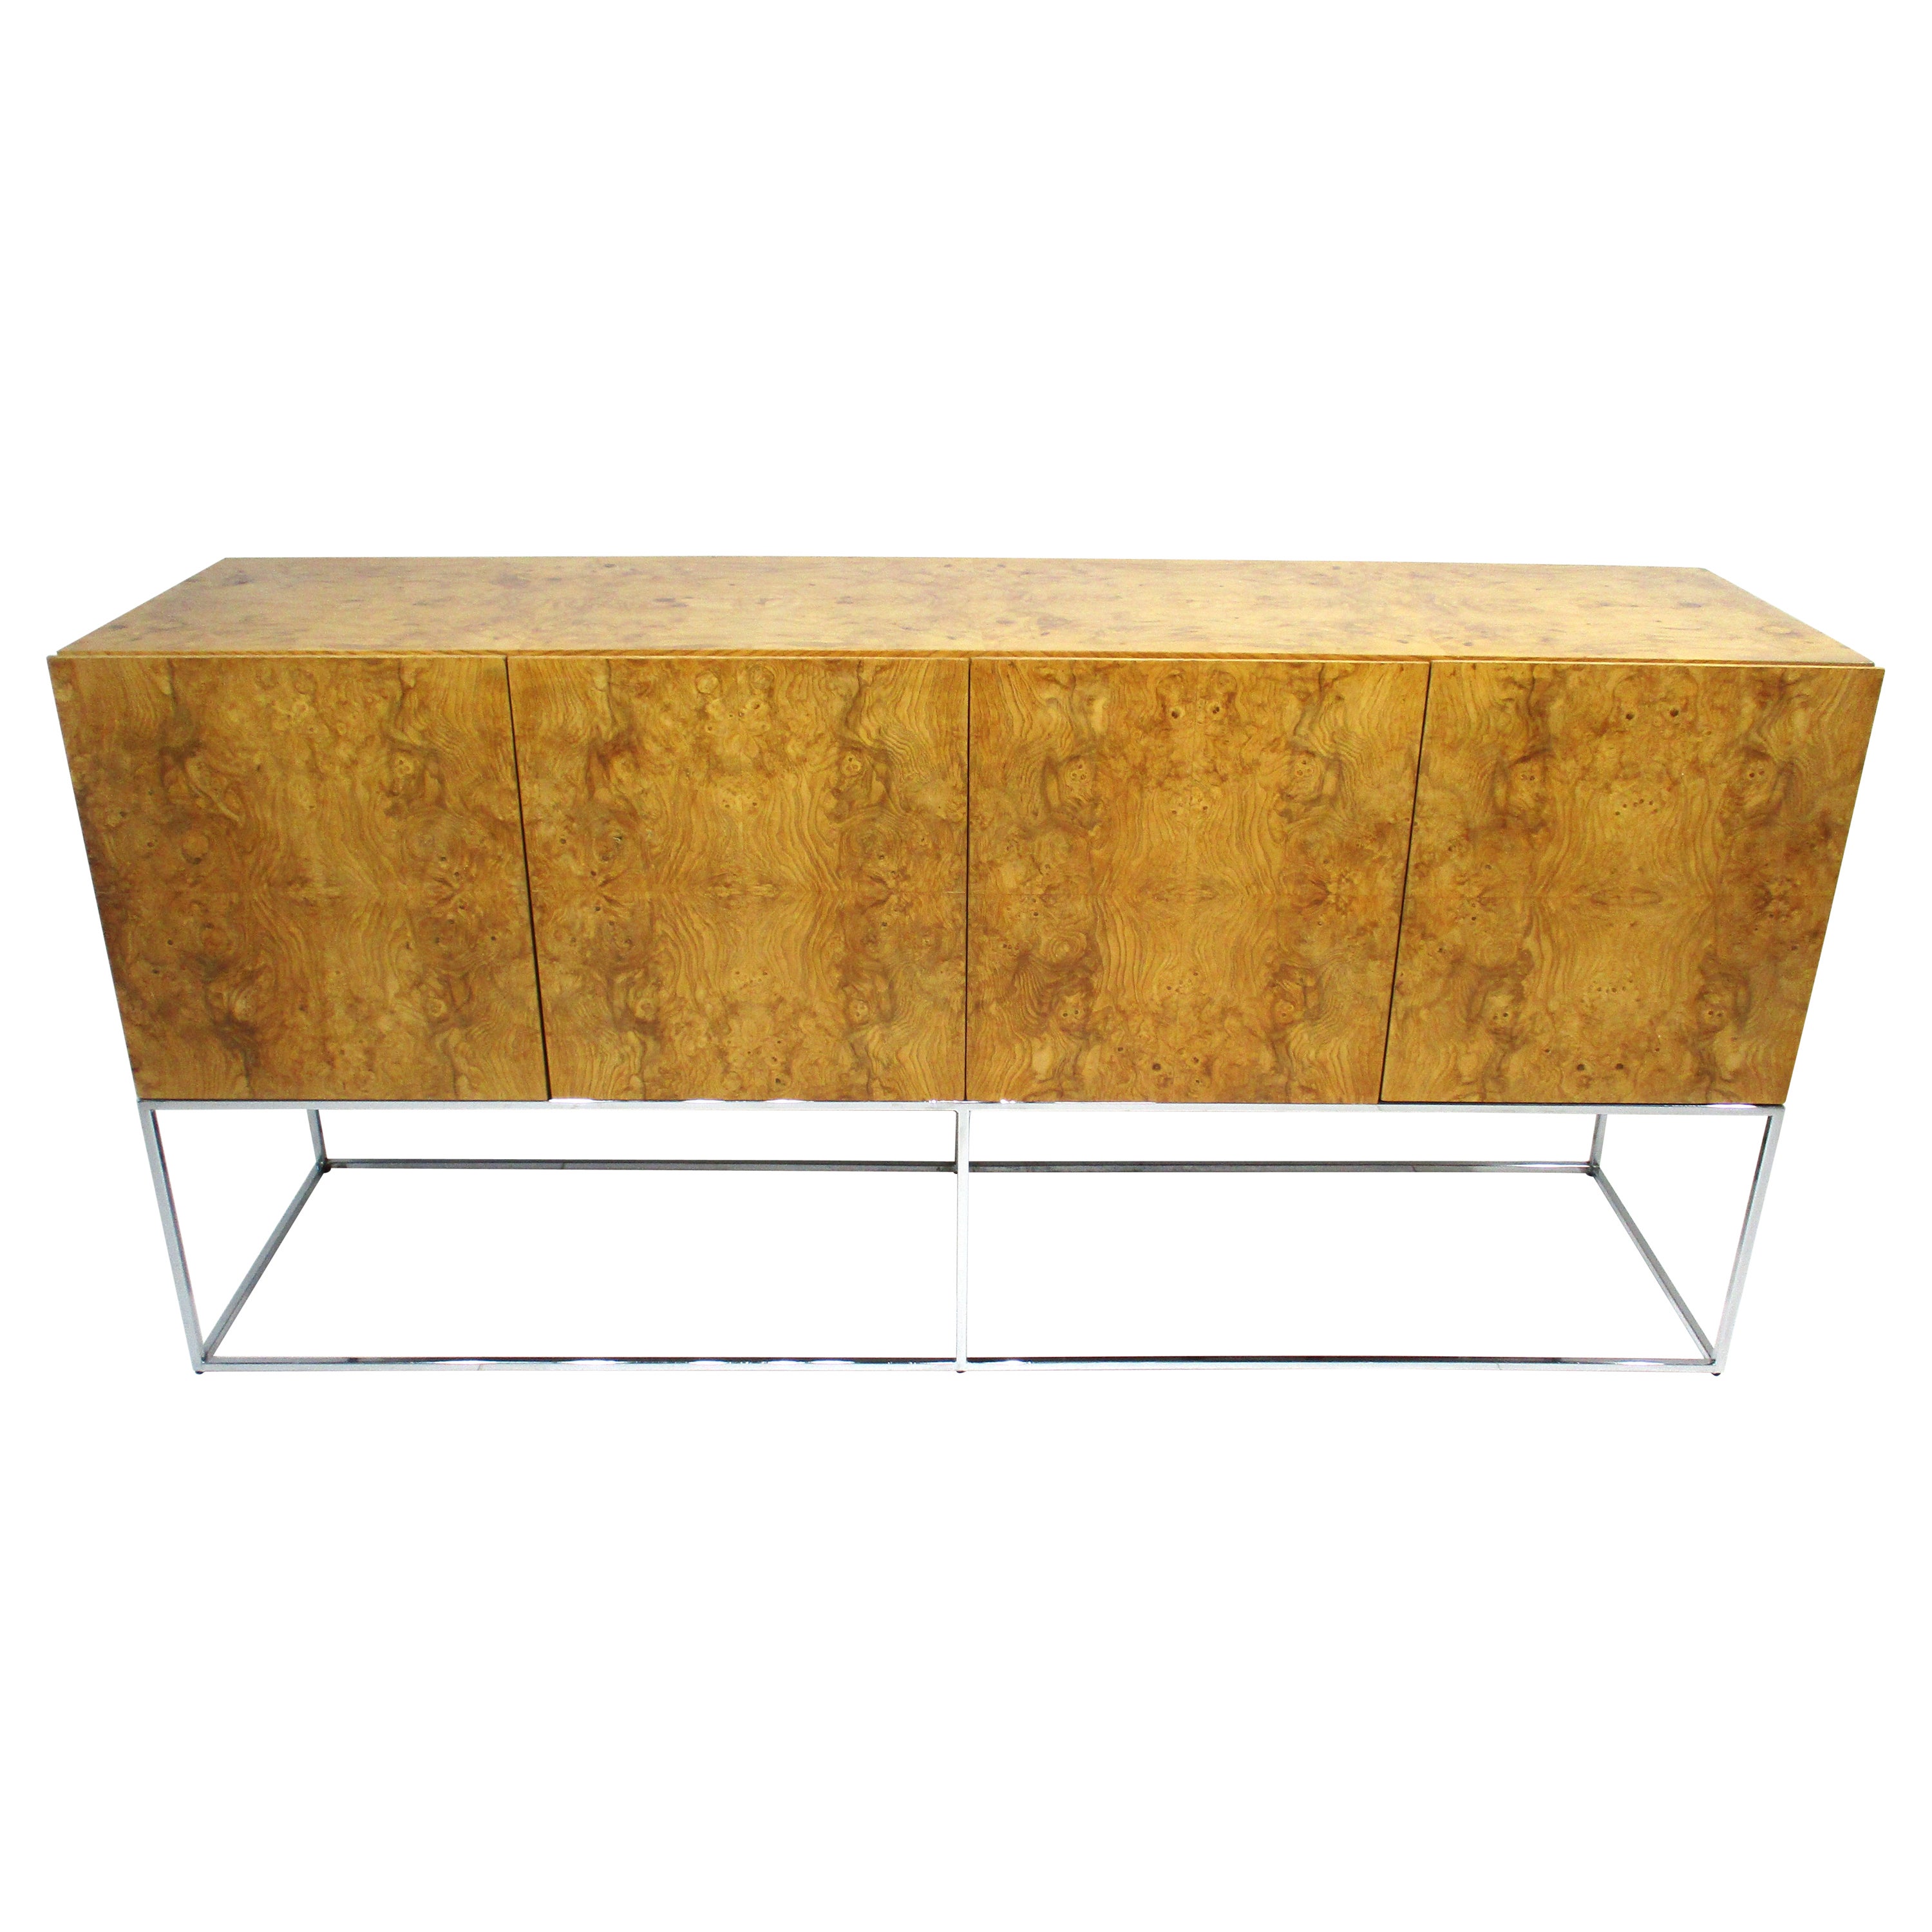 Milo Baughman Olivewood Chrome Credenza or Server by Thayer Coggin